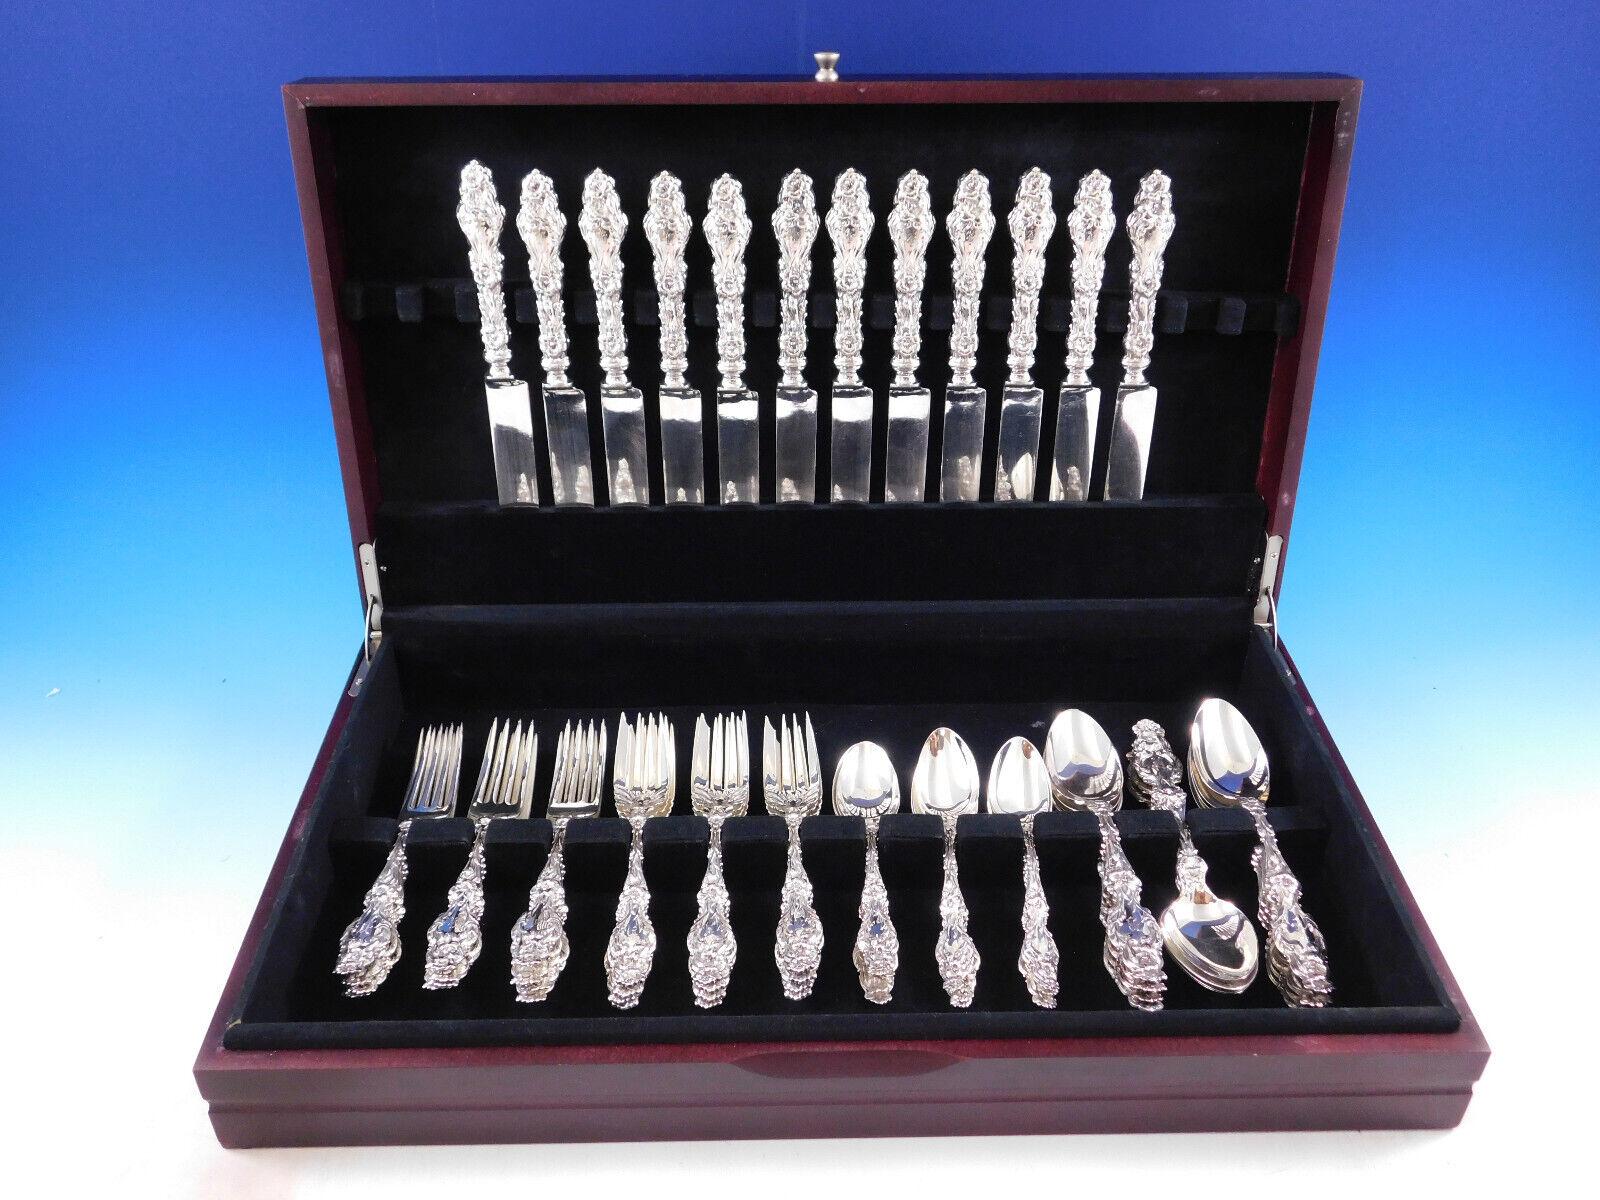 Beautiful Lily by Whiting Sterling Silver Flatware set - 60 pieces. This set includes:

12 Knives with blunt silverplated blades, 9